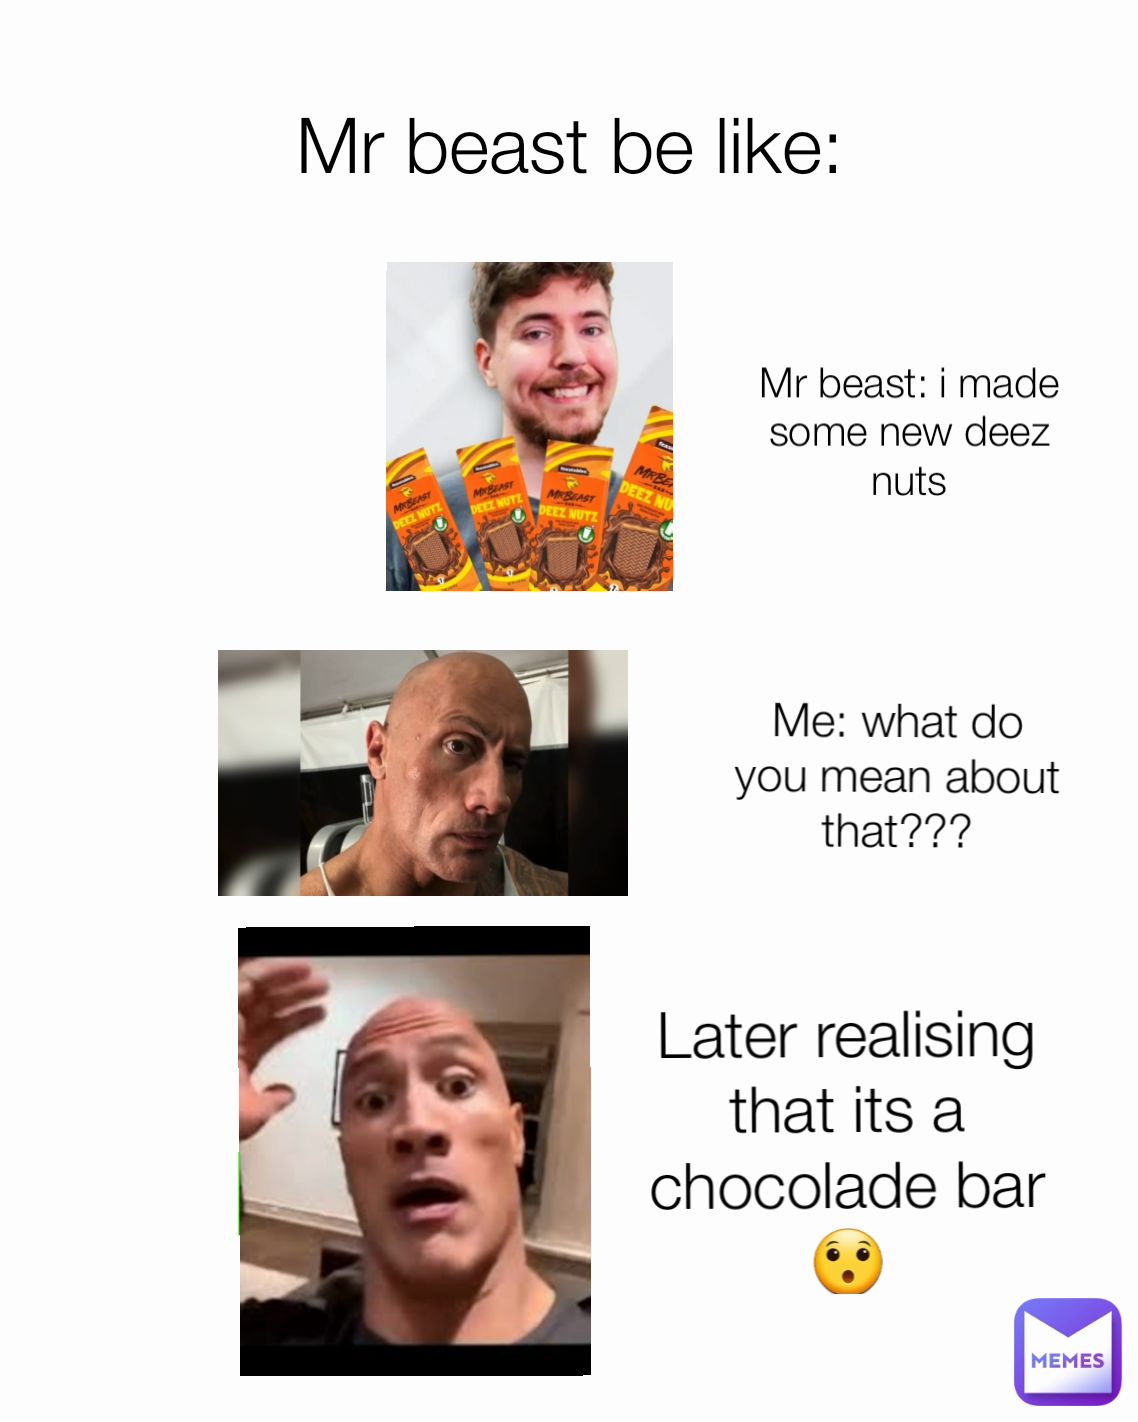 Later realising that its a chocolade bar😯 Me: what do you mean about that??? Mr beast: i made some new deez nuts Mr beast be like: